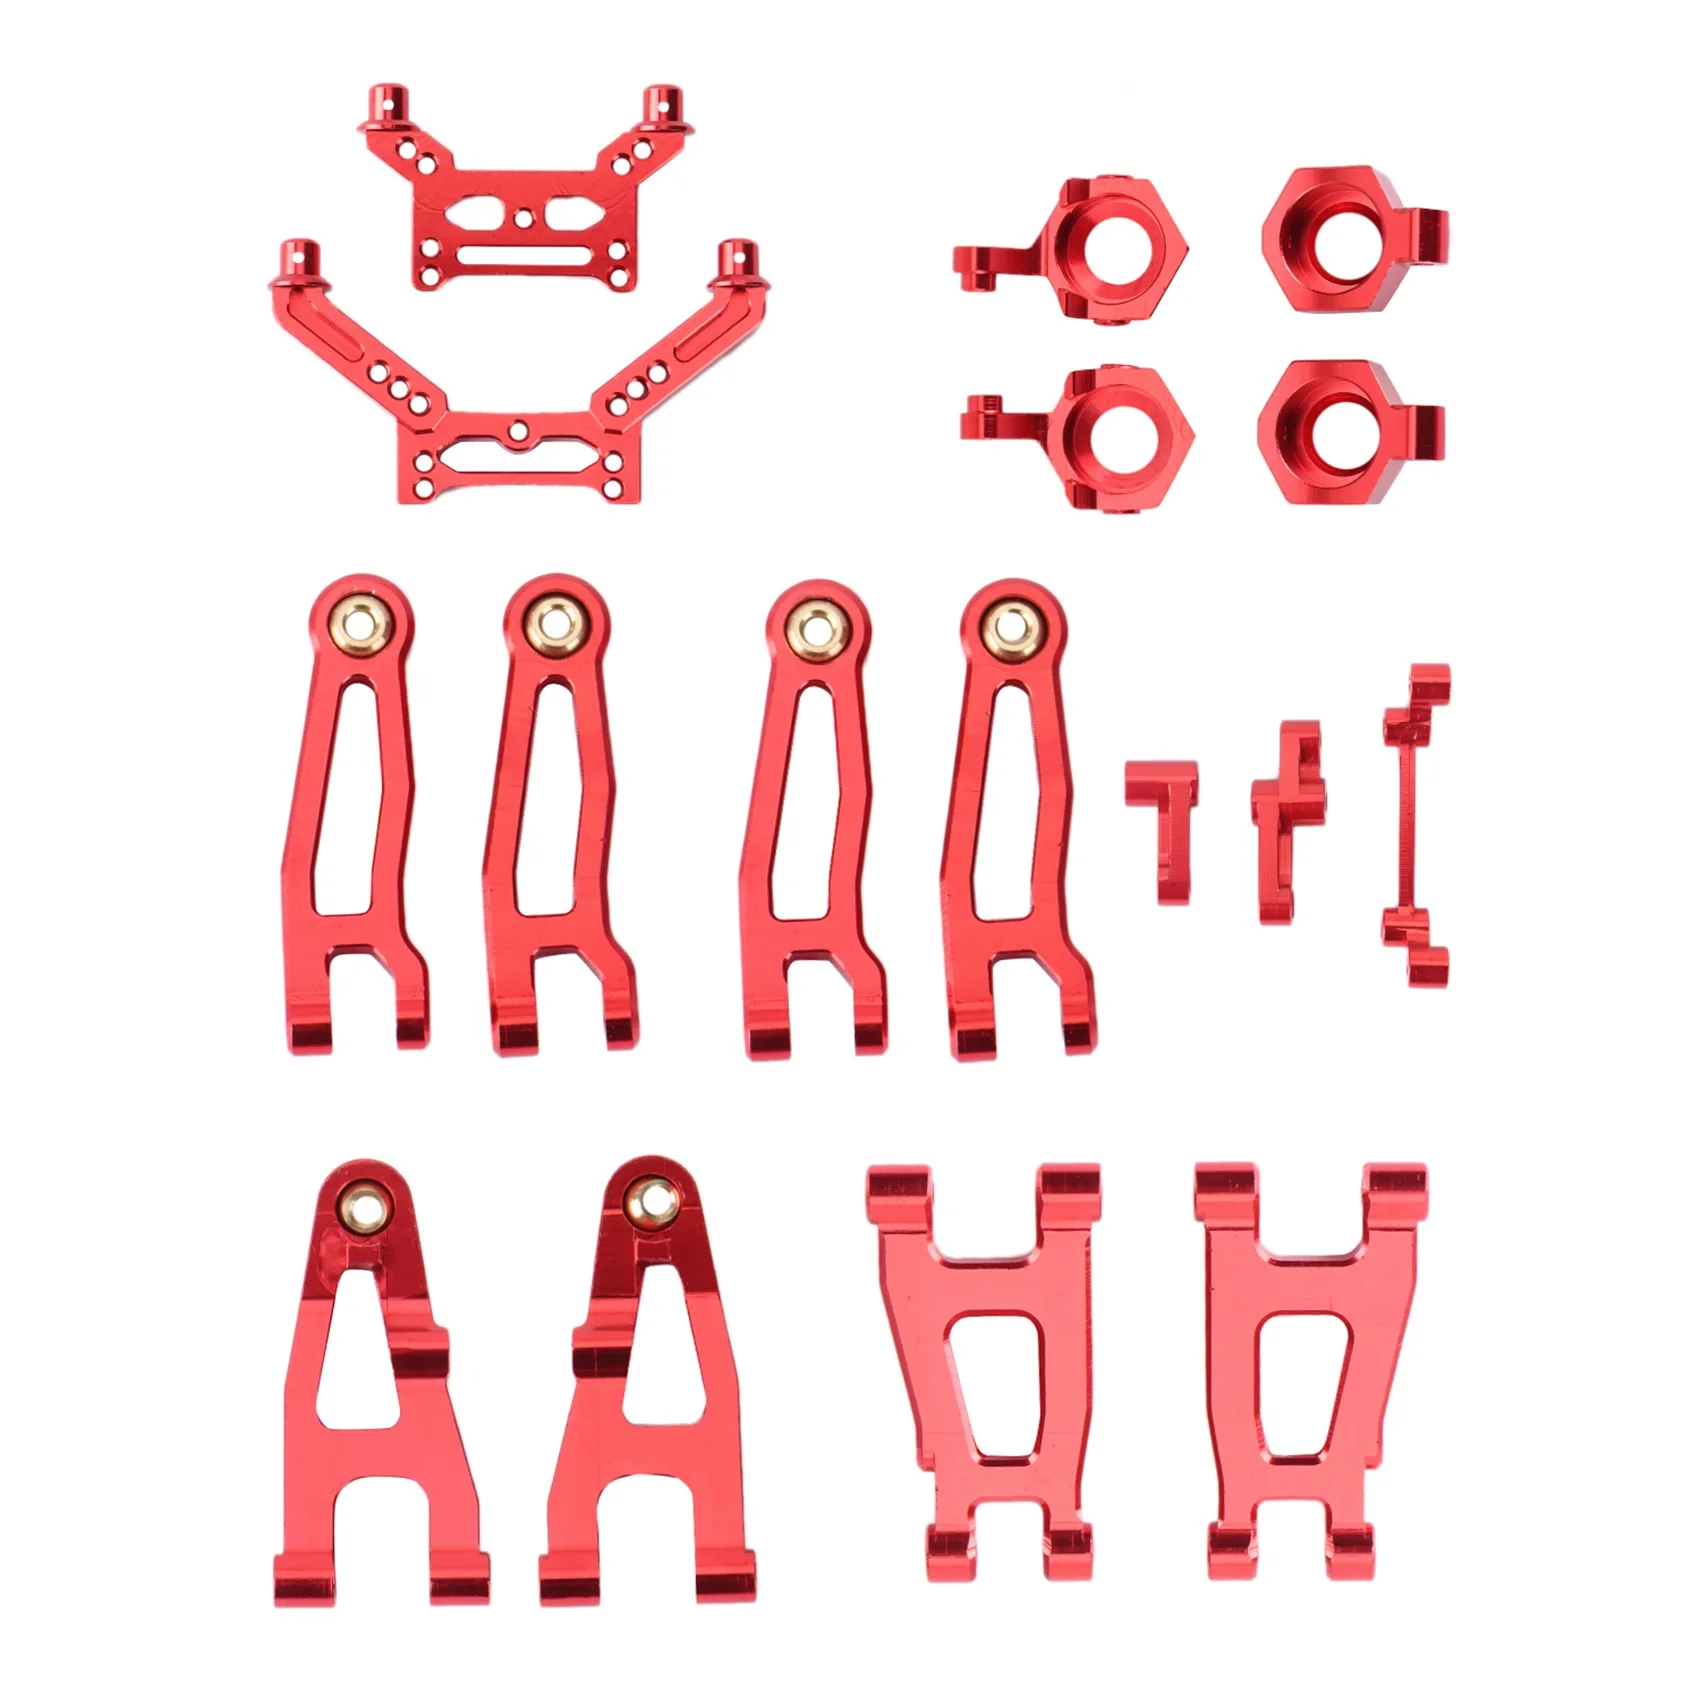 

Metal Upgrade Parts Kit Swing Arm for SG 1603 SG 1604 SG1603 SG1604 UDIRC UD1601 UD1602 1/16 RC Car Accessories,Red